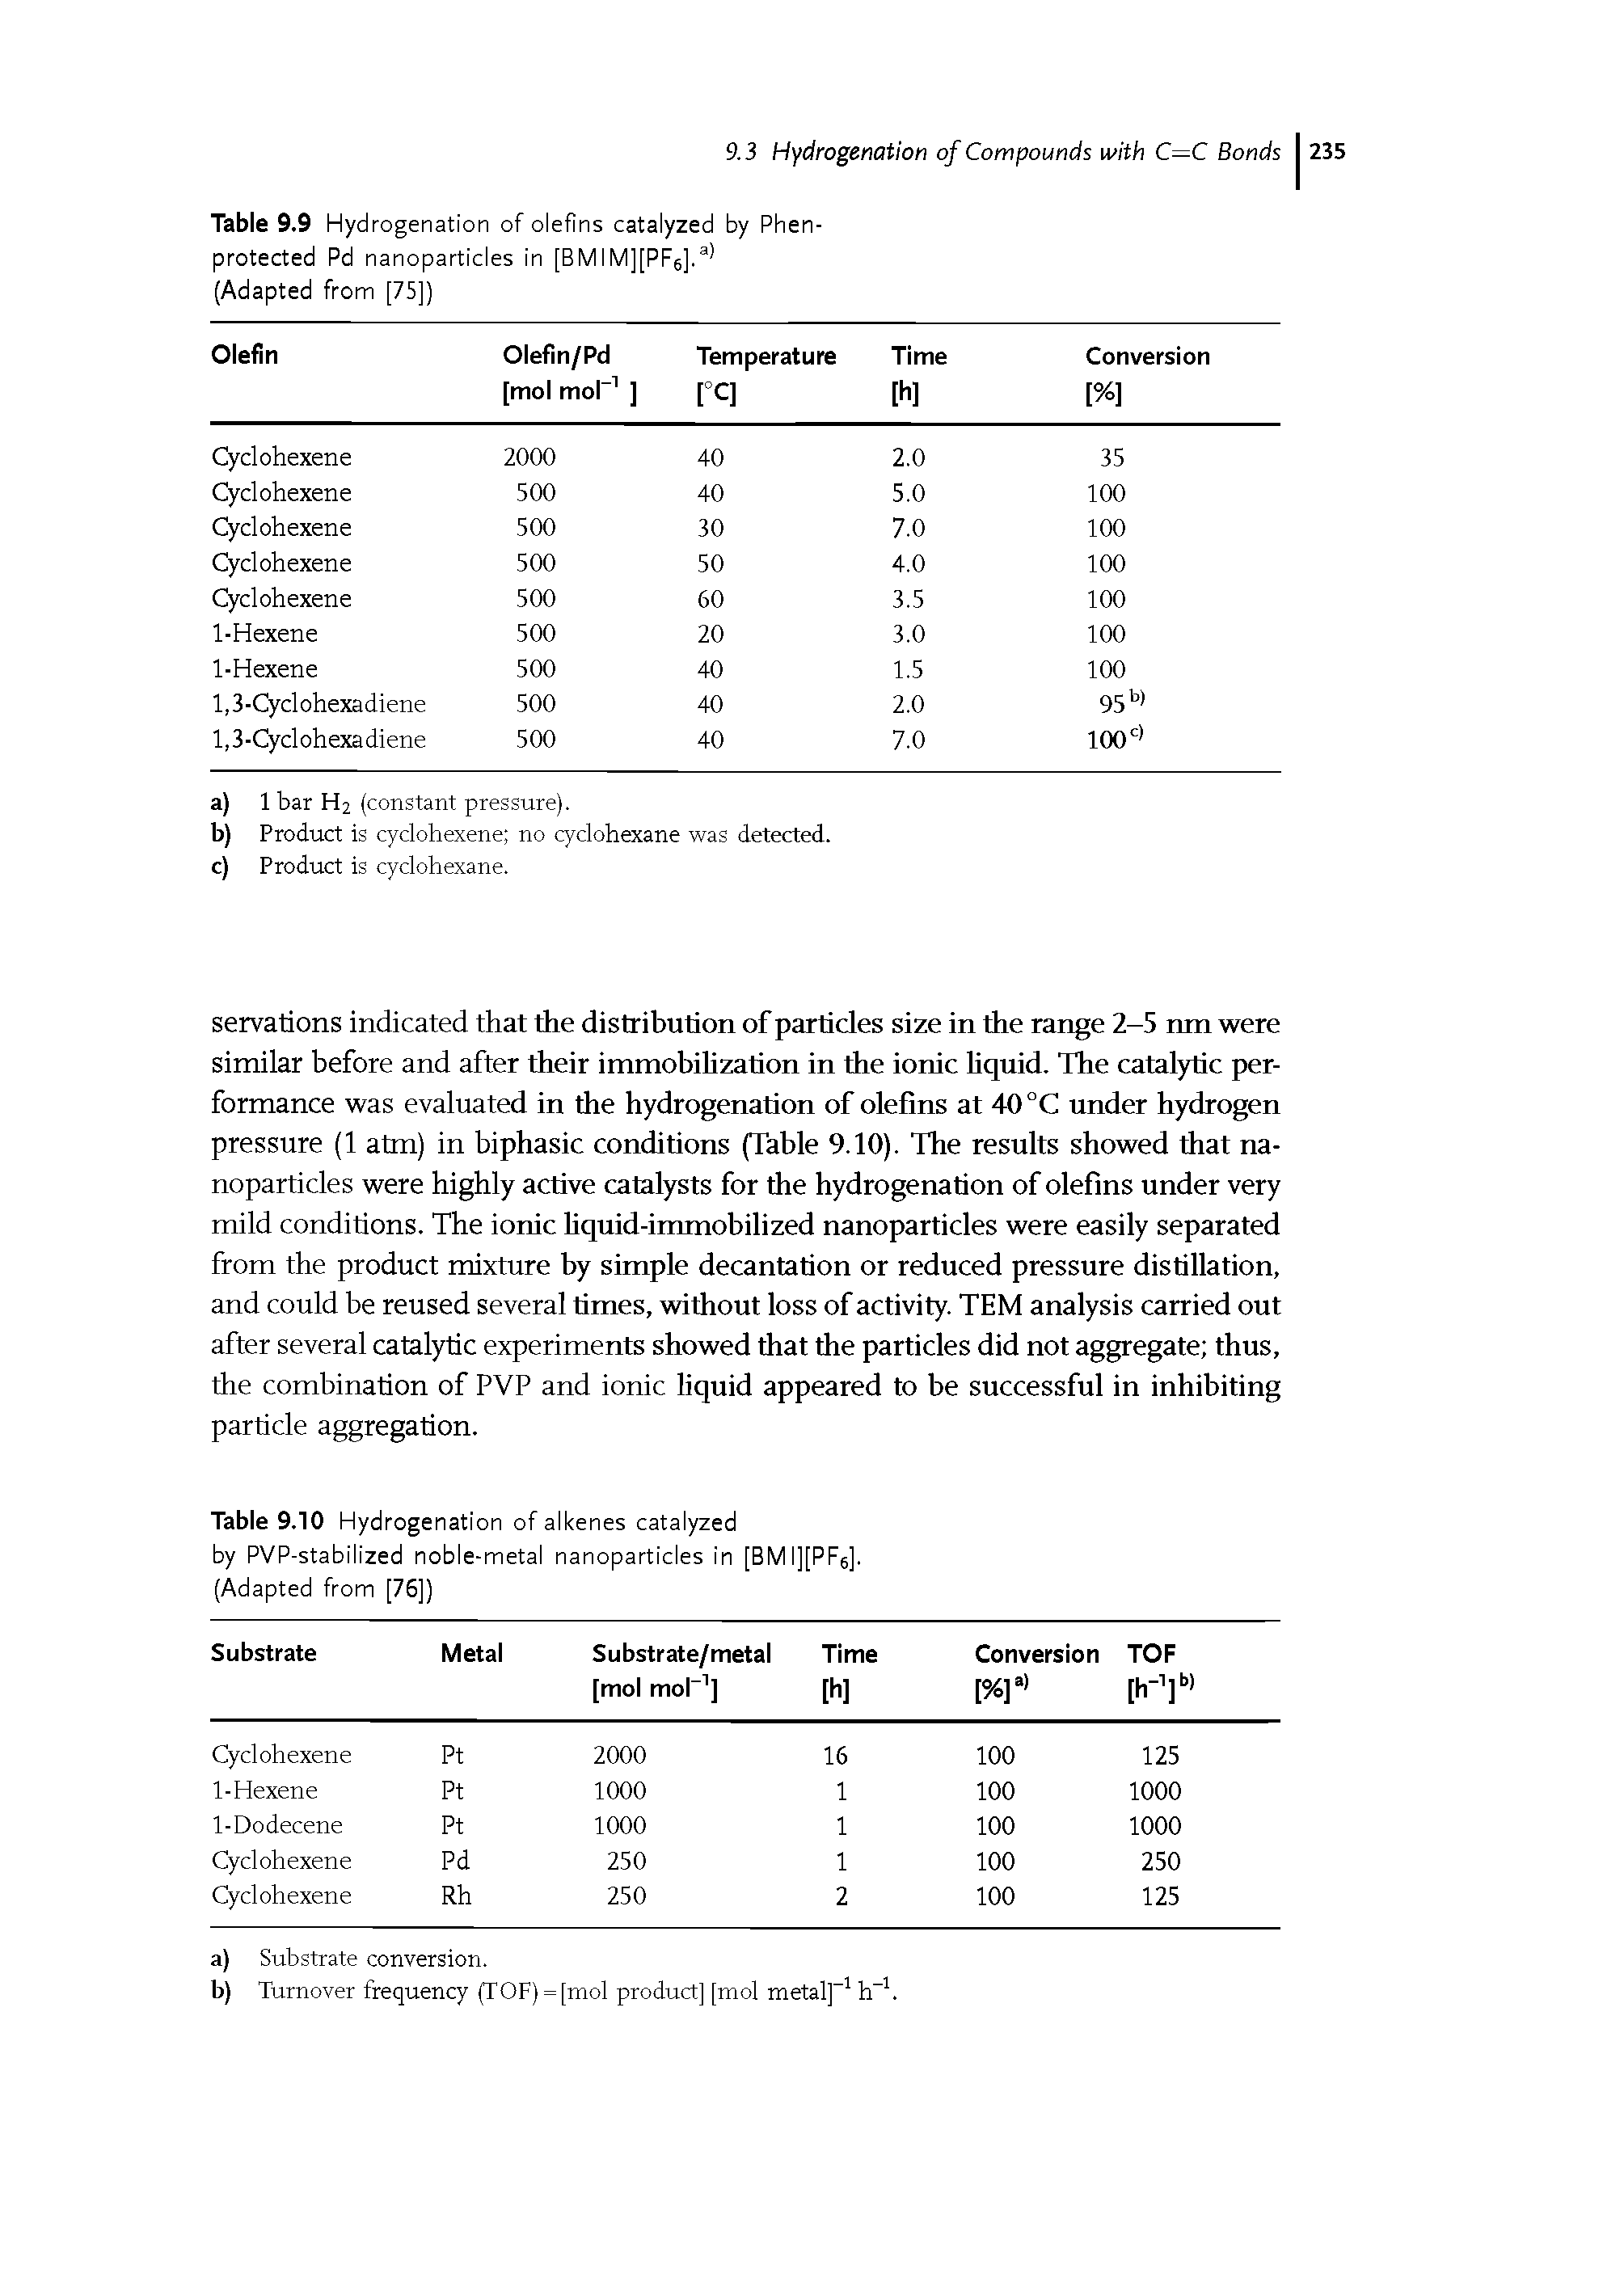 Table 9.10 Hydrogenation of alkenes catalyzed by PVP-stabilized noble-metal nanoparticles in [BMI][PF6]. (Adapted from [76])...